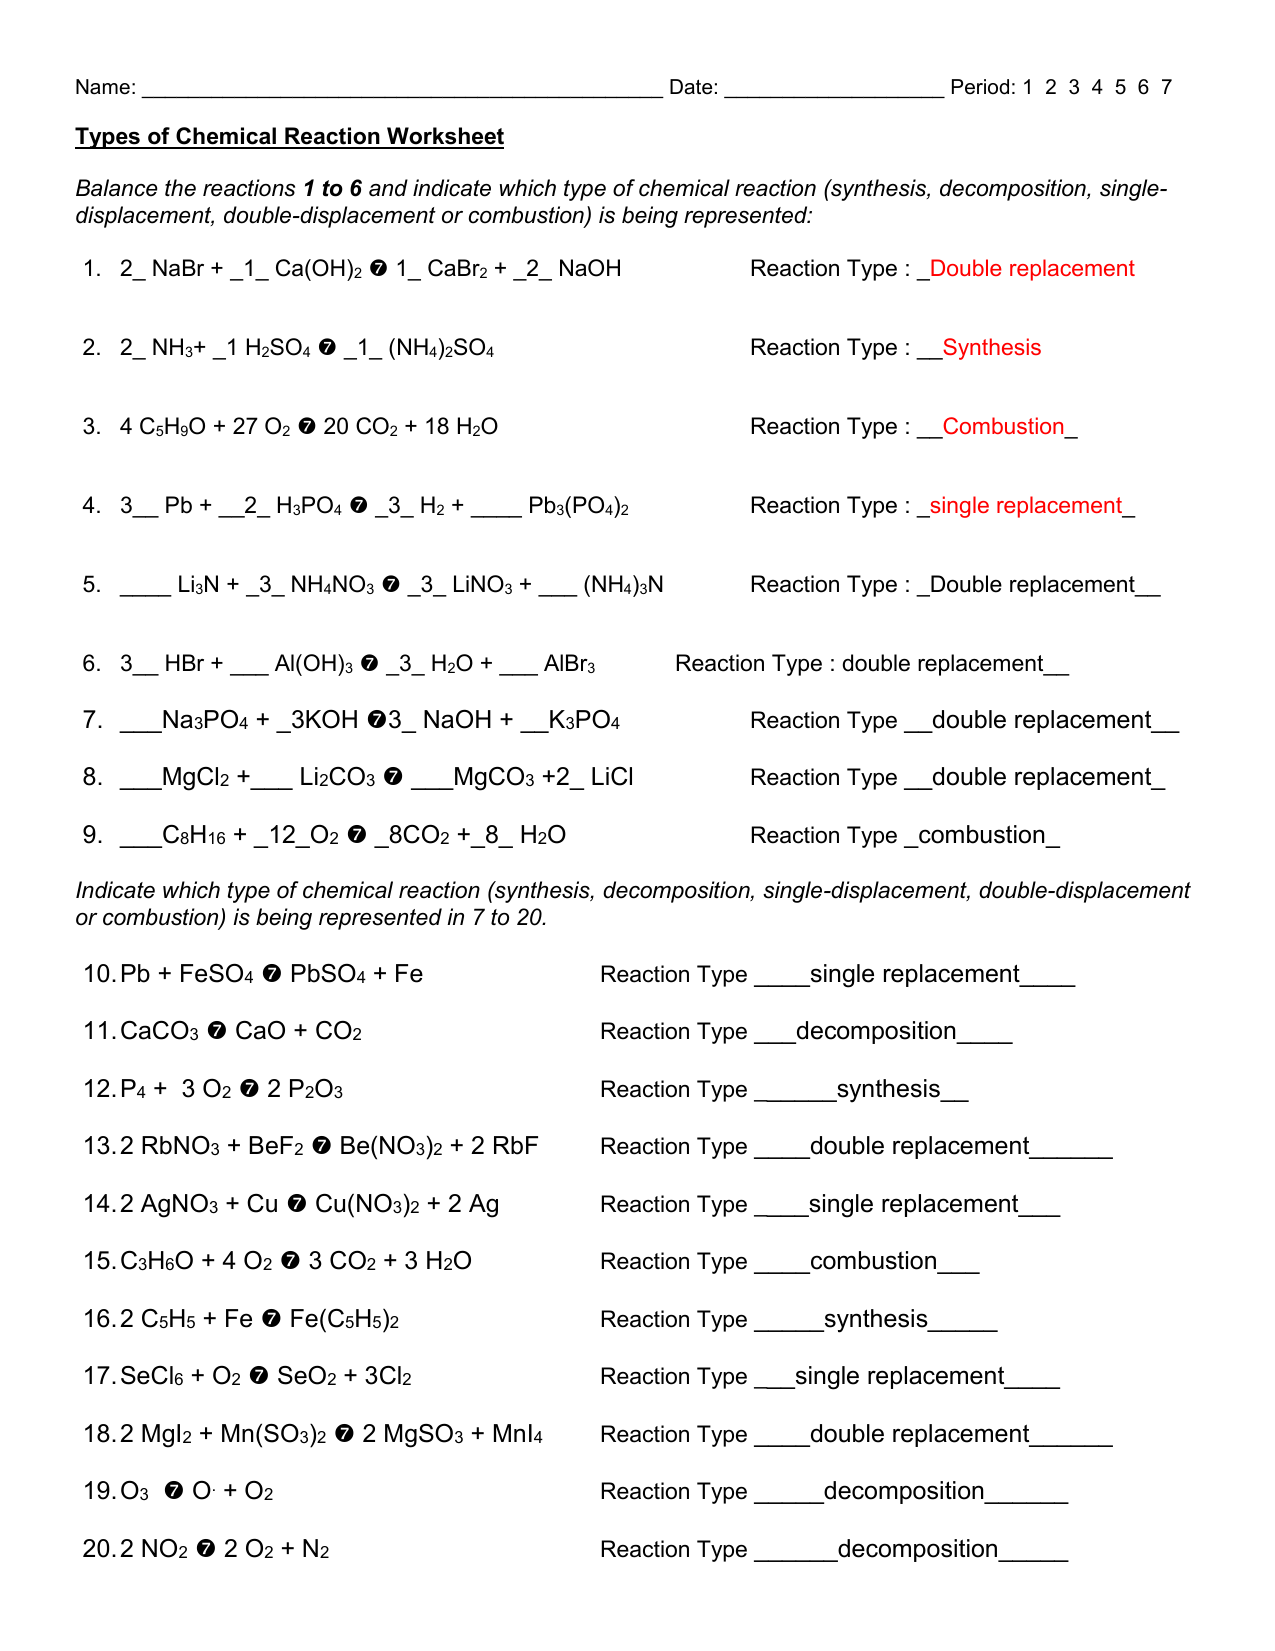 Types of Chemical Reaction Worksheetanswers In Chemical Reaction Type Worksheet